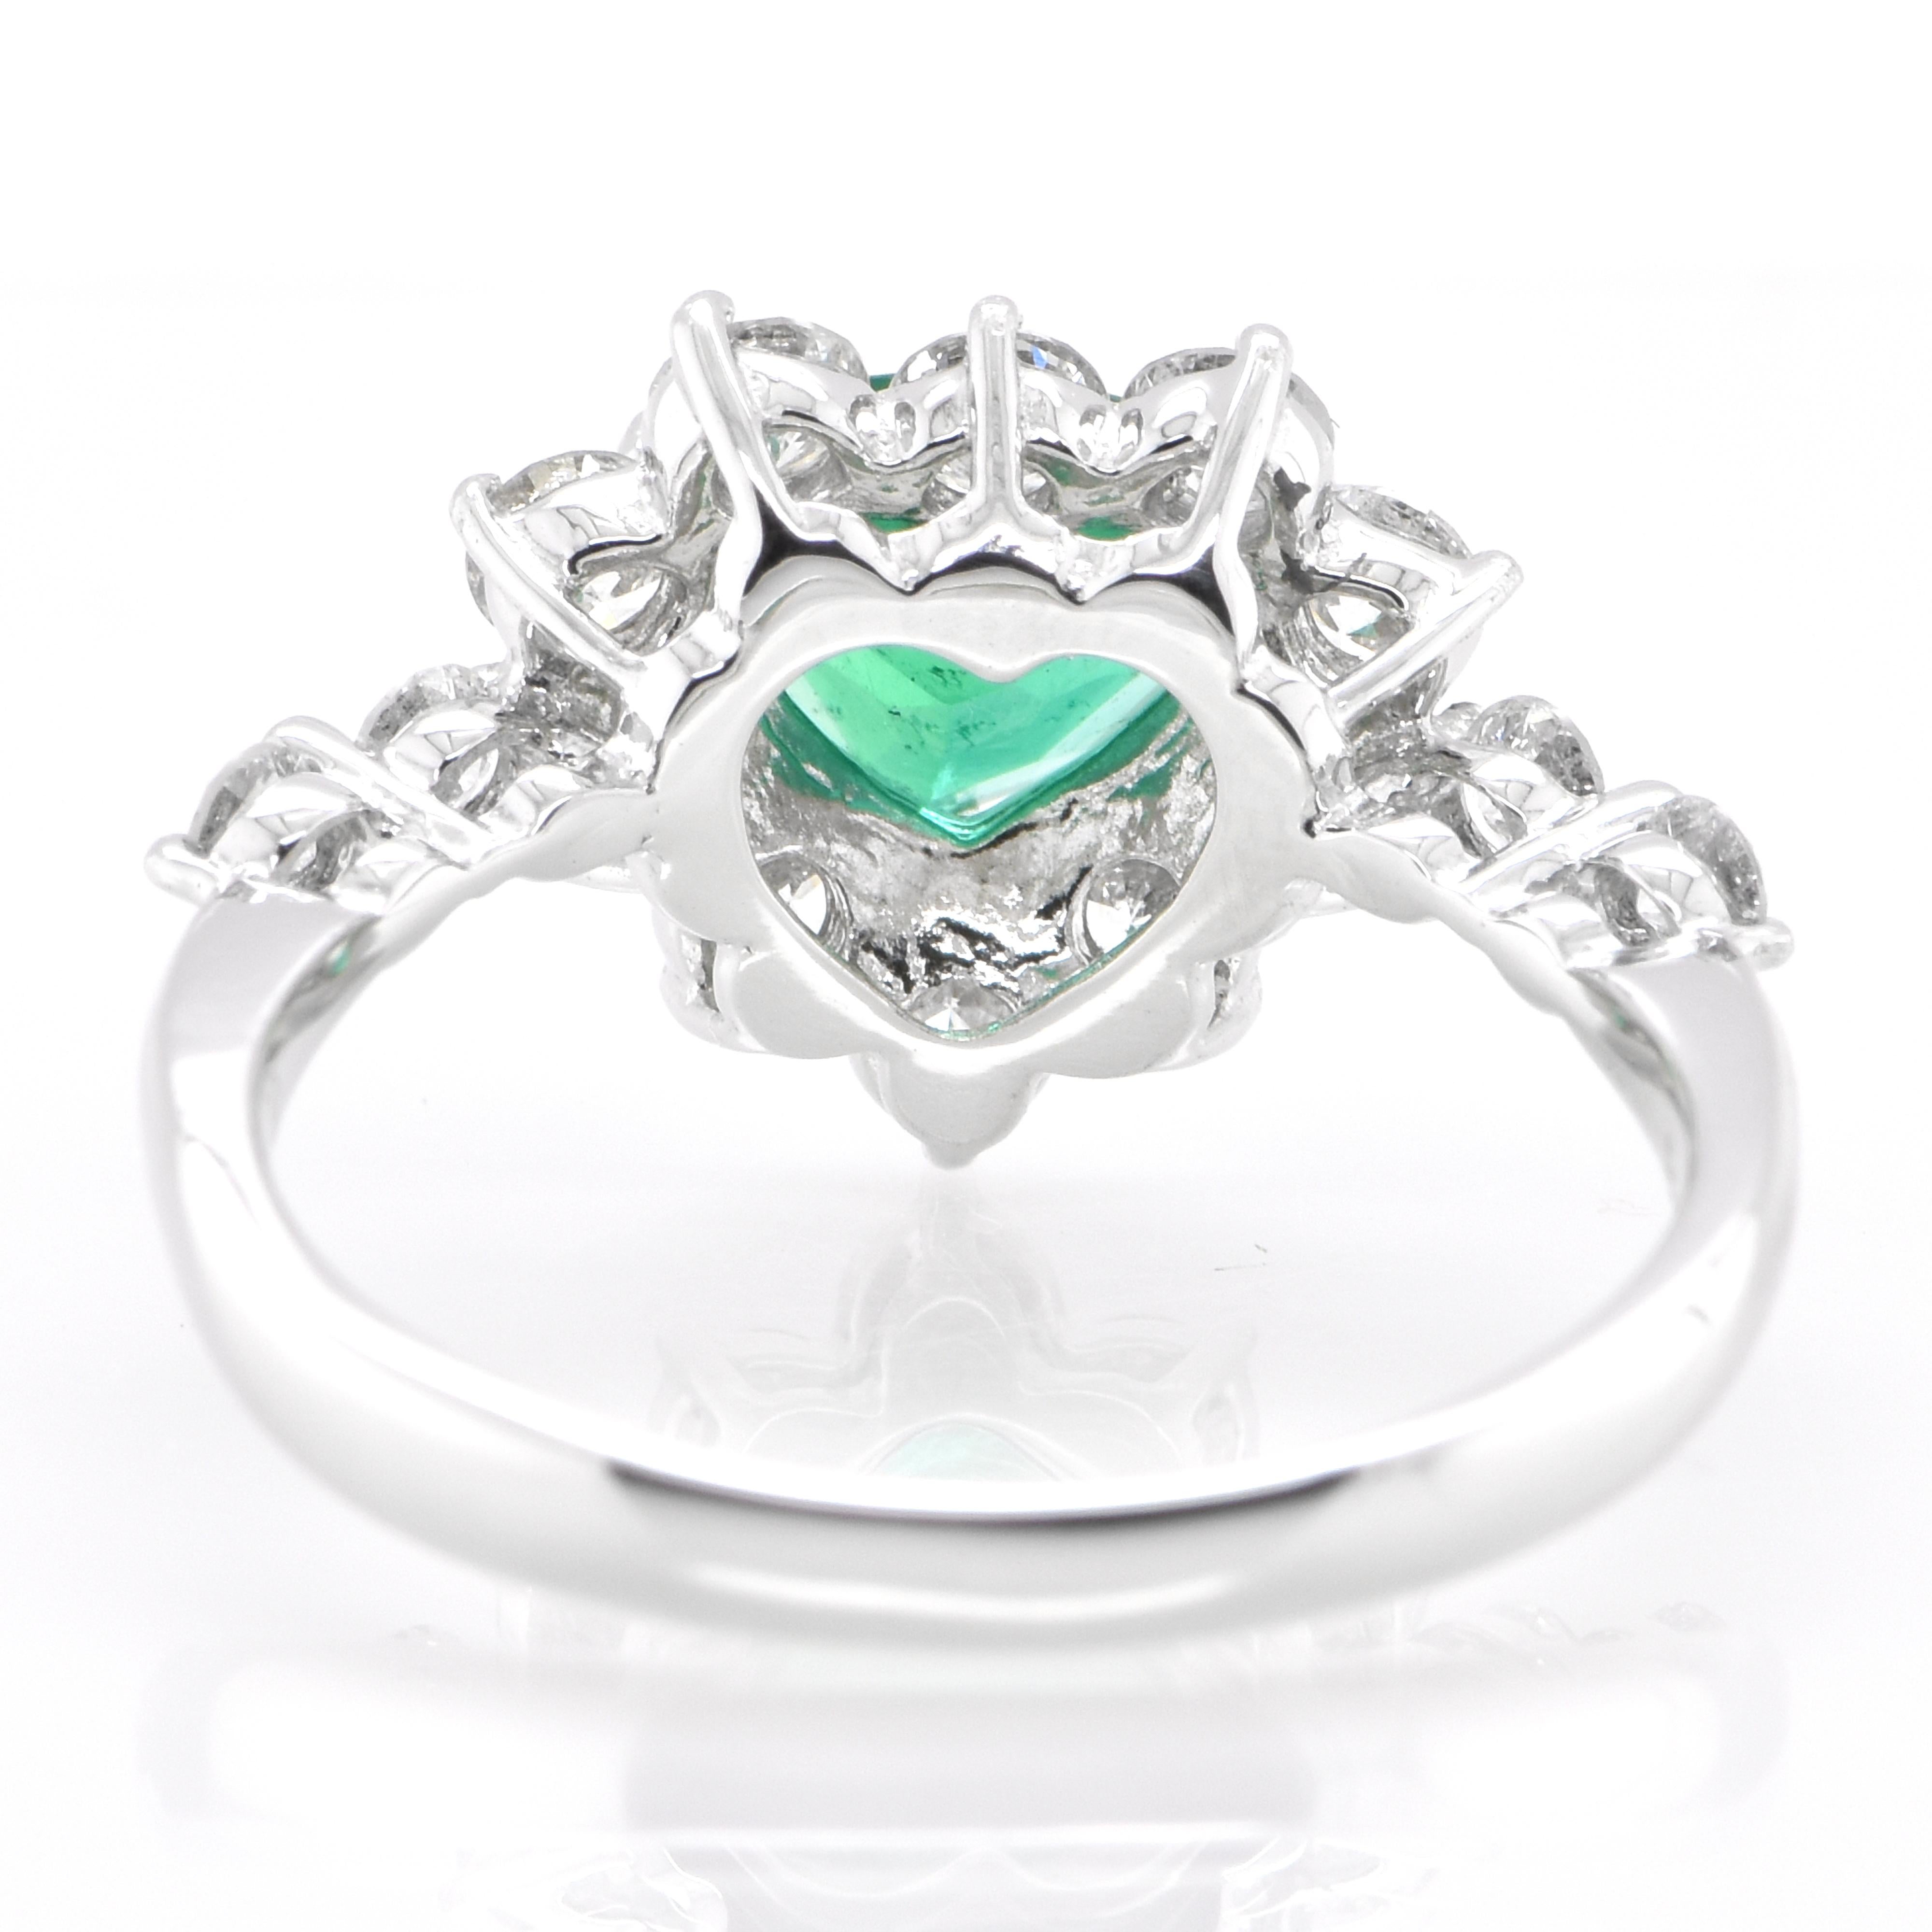  0.83 Carat Natural, Trillion Cut Emerald and Diamond Ring Set in Platinum For Sale 1